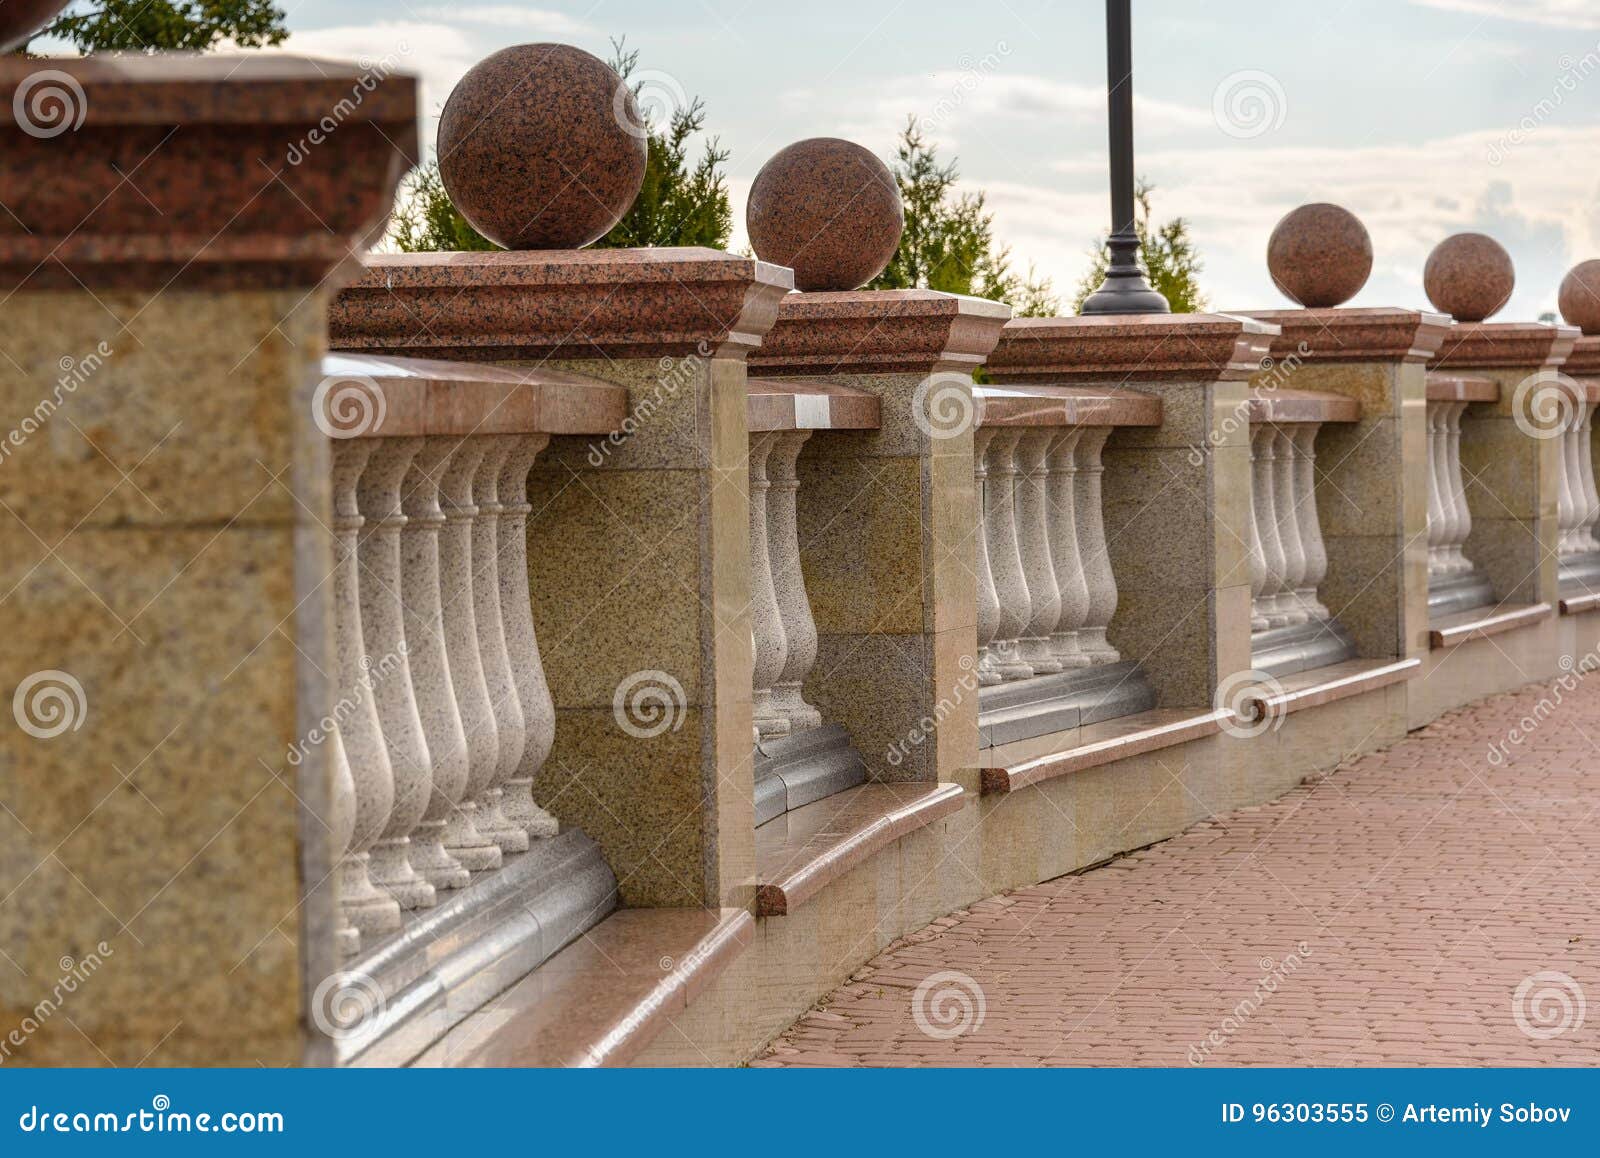 421 Granite Balustrade Photos Free Royalty Free Stock Photos From Dreamstime